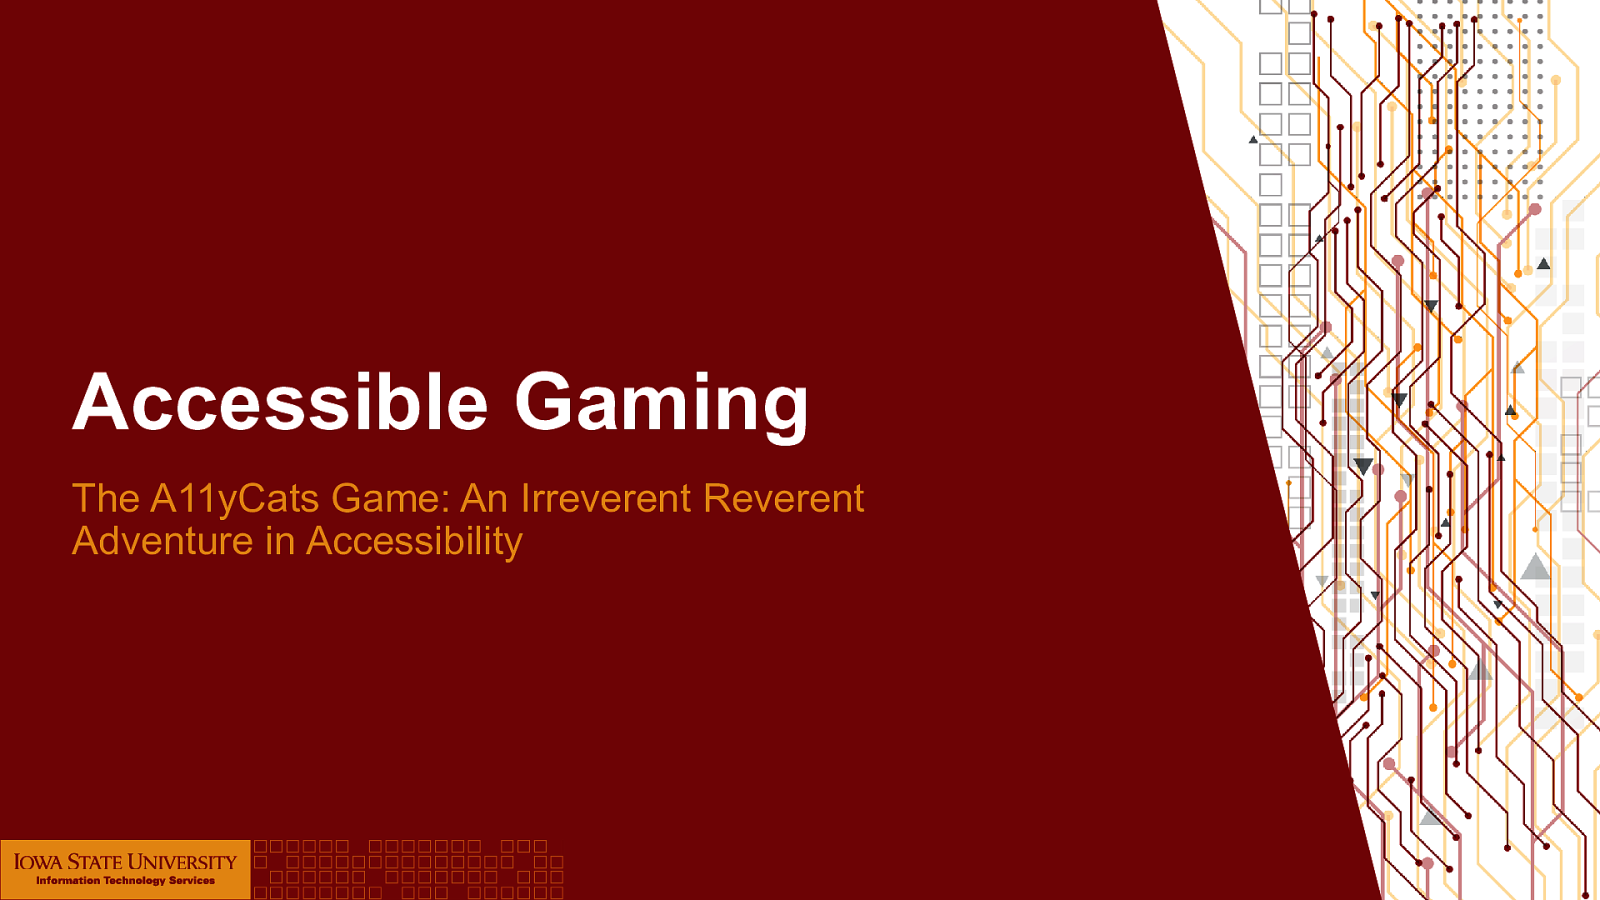 Accessible Gaming The A11yCats Game: An Irreverent Reverent Adventure in Accessibility